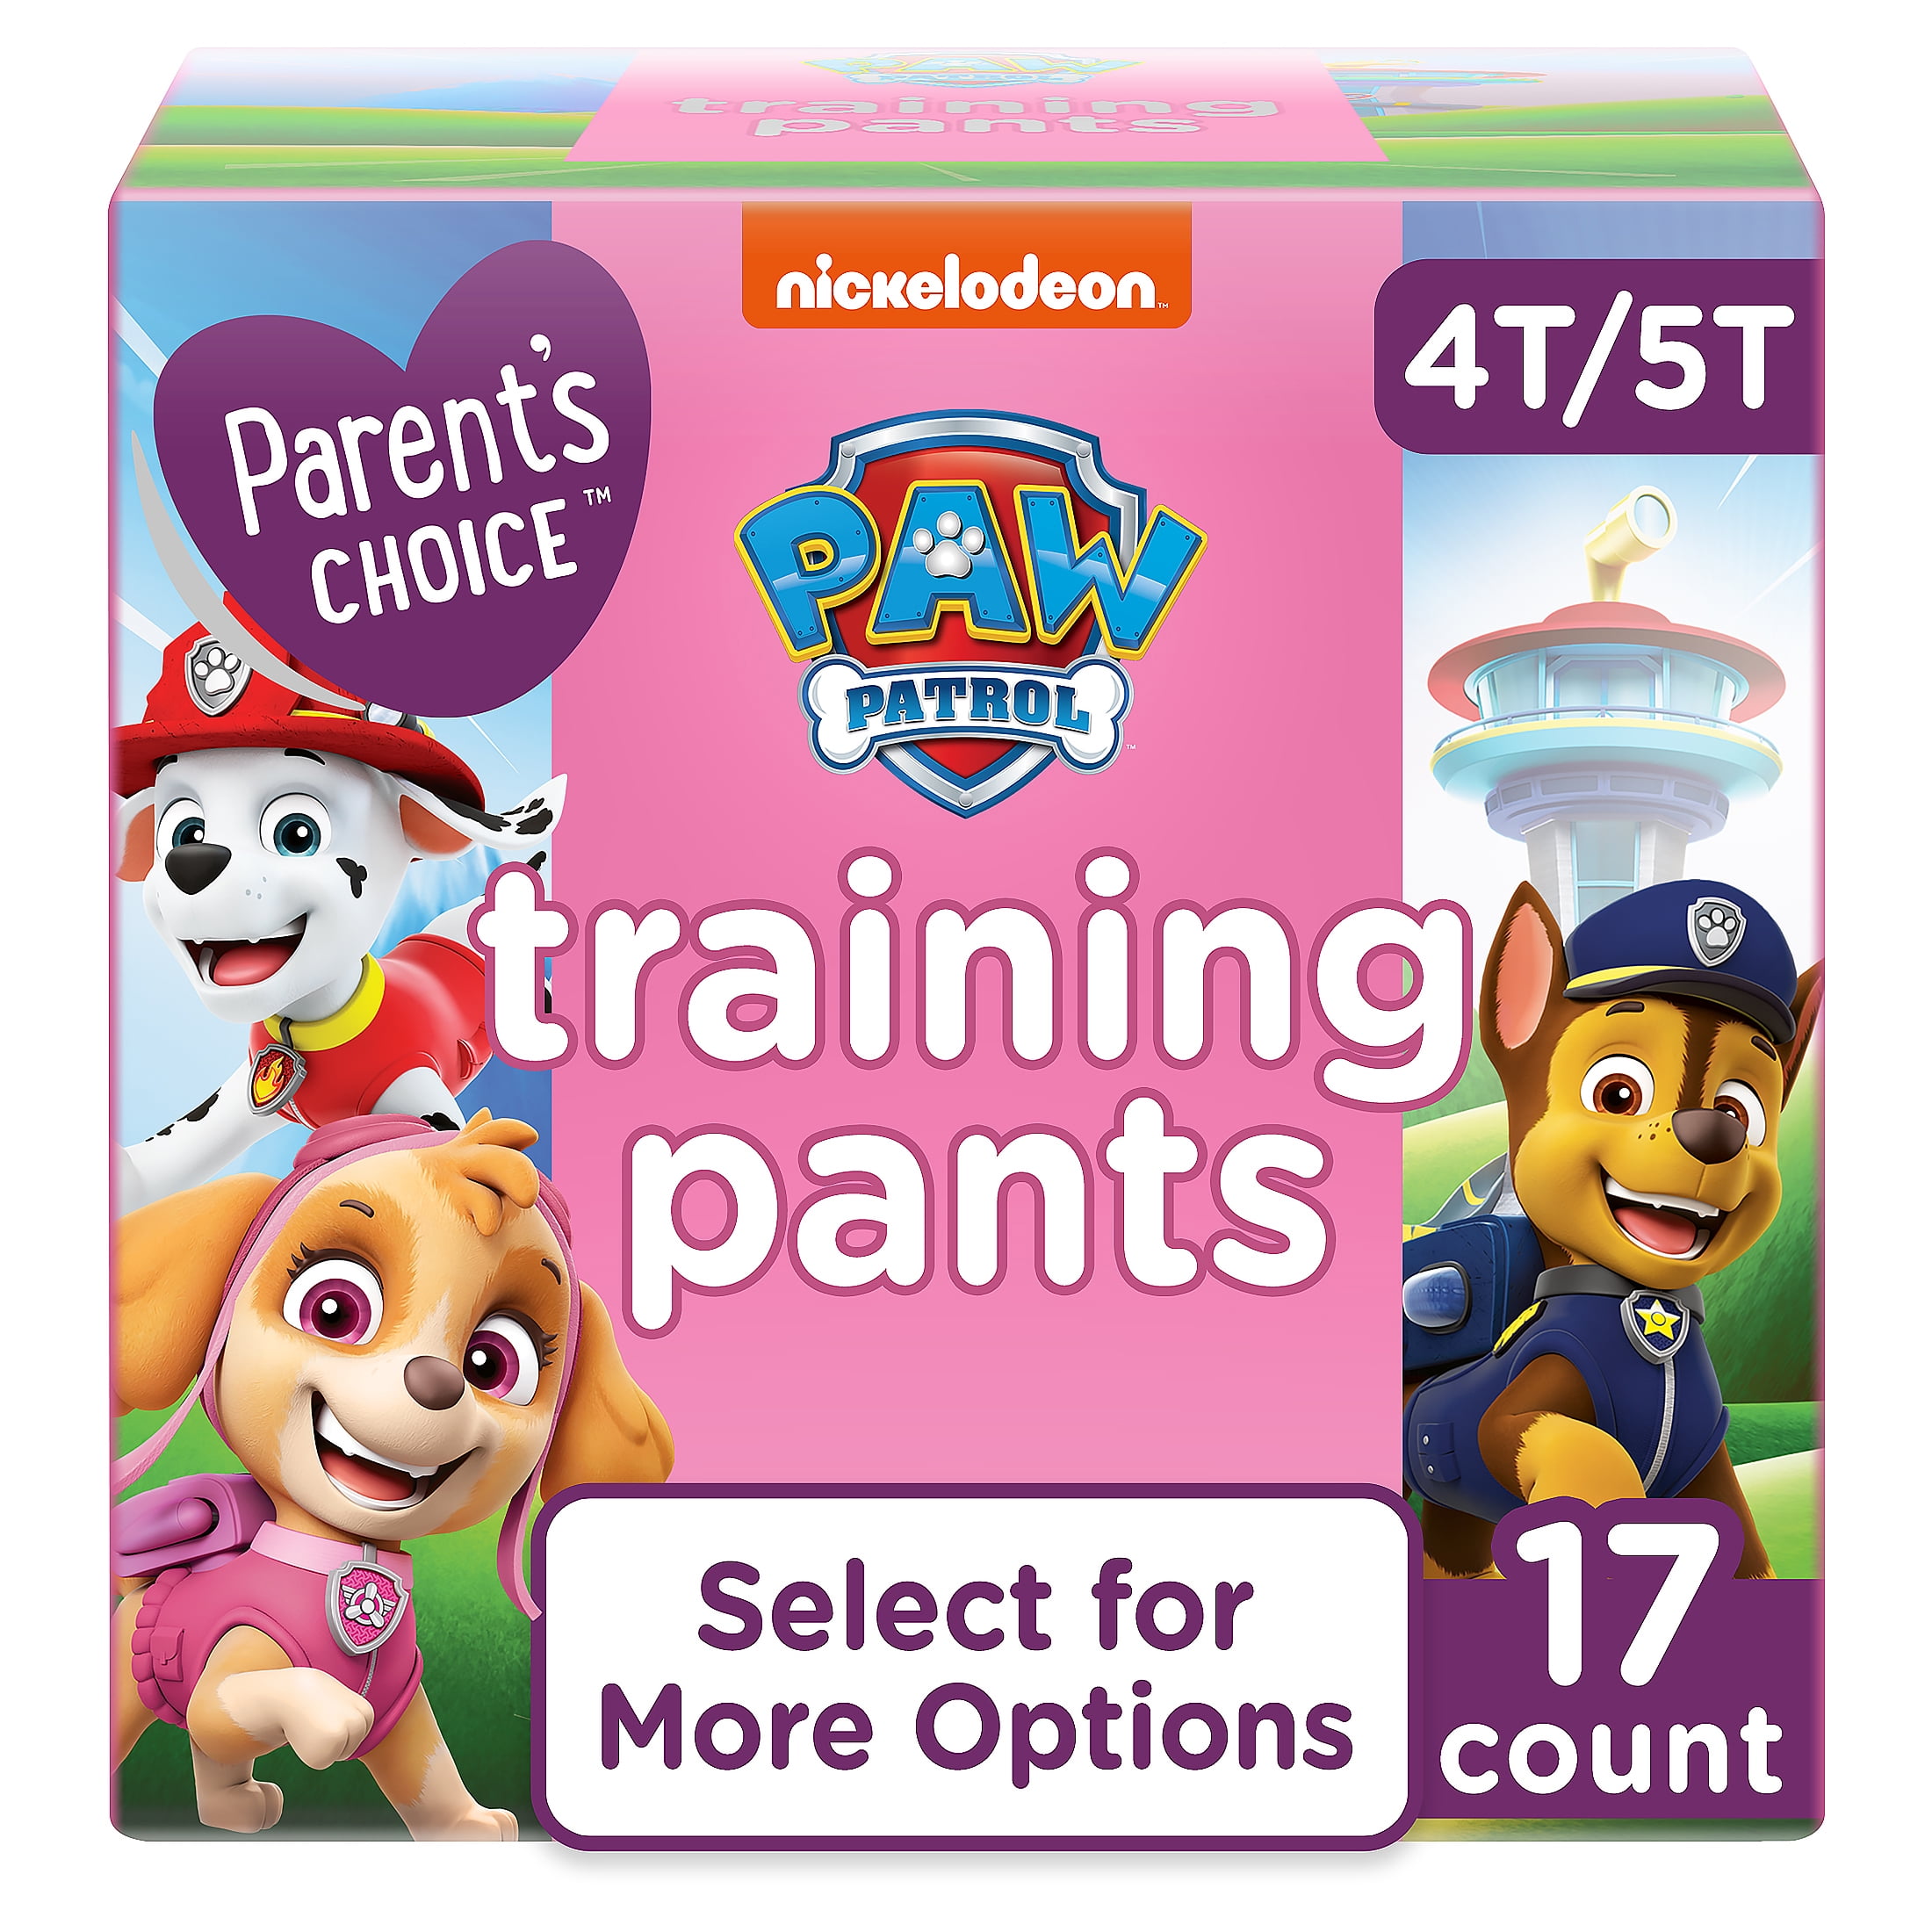 Pull-ups Learning Designs Girls' Training Pants 4t-5t 17 Count for